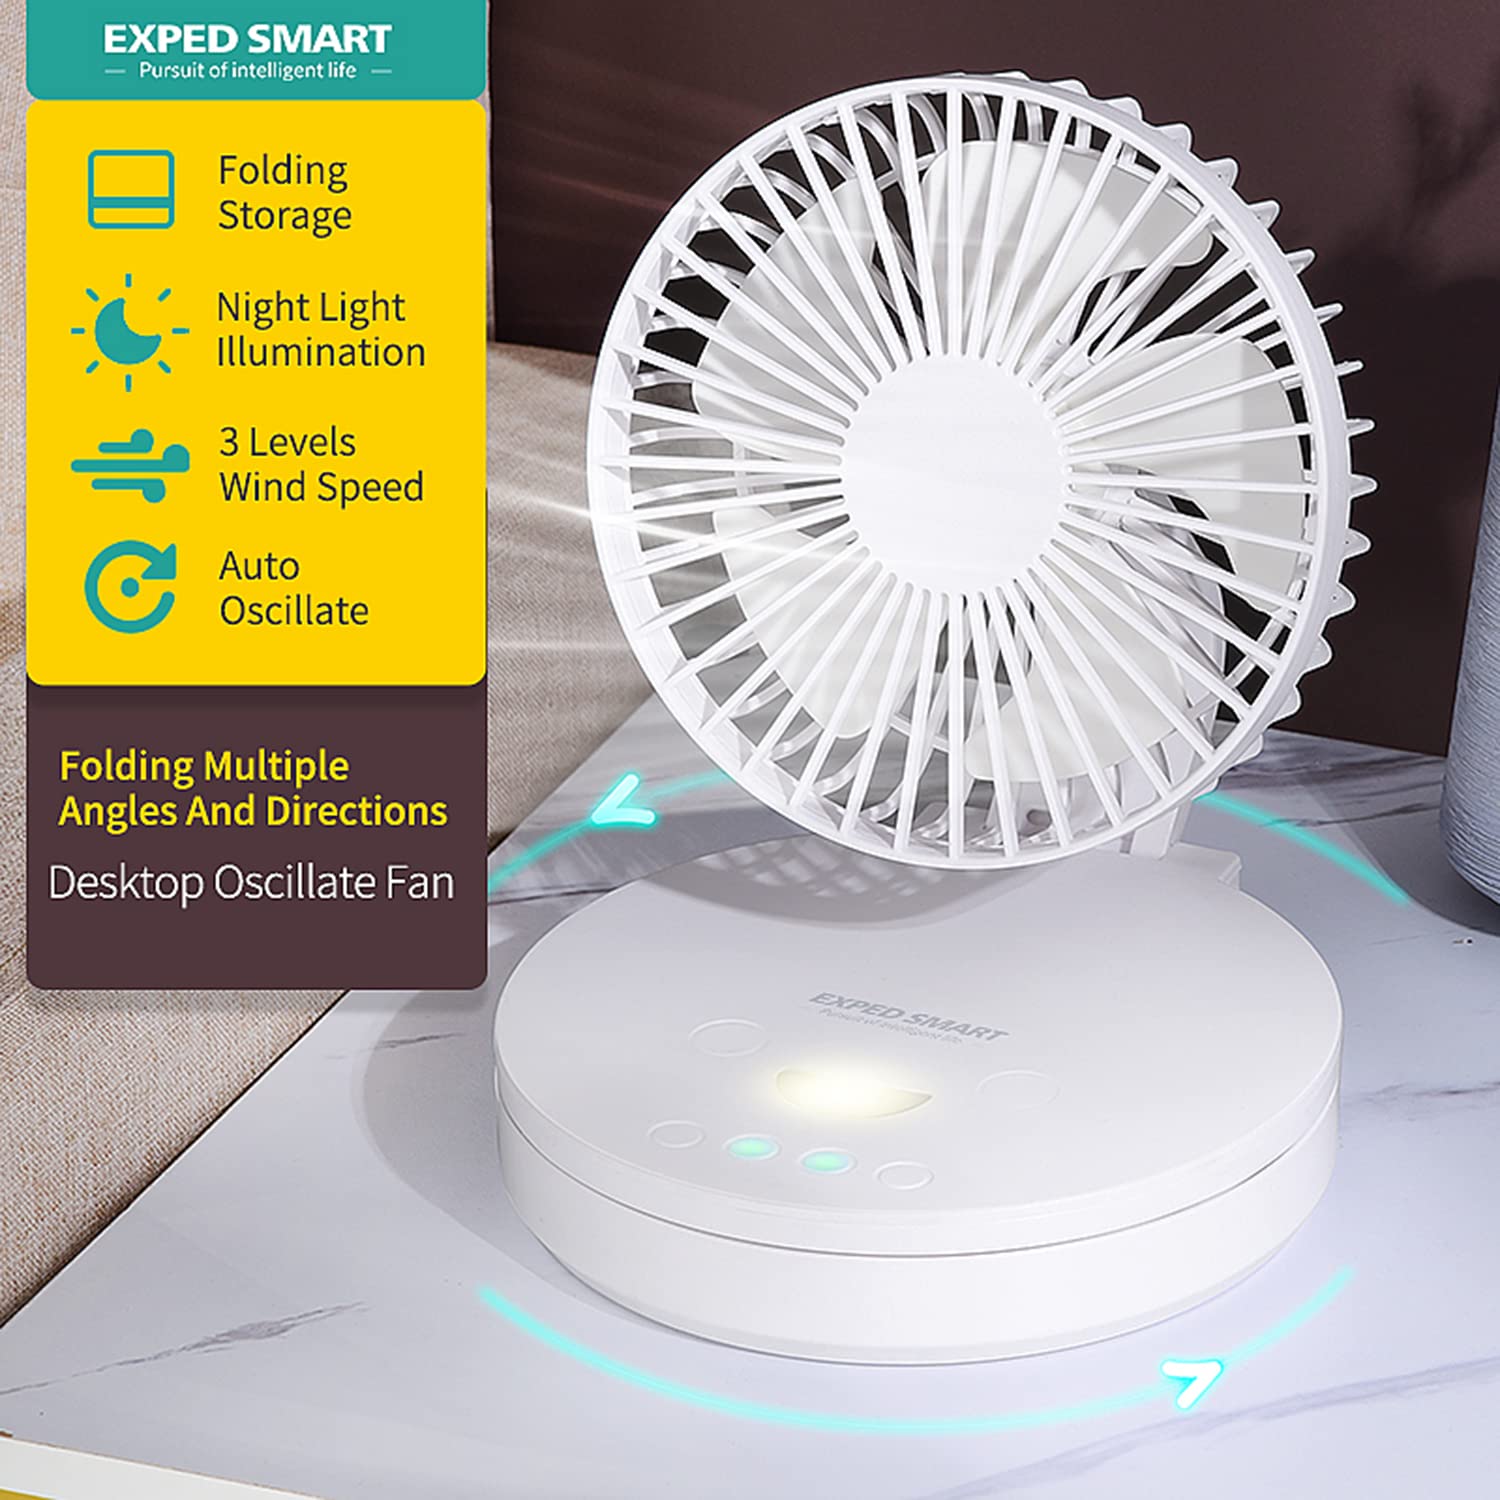 SDYXJ Portable Fan Rechargeable, Stand & table fan Folding & With 4 Speeds ，120 Degree Oscillating & Adjustable Tilt/Head Quiet for Office Home Outdoor Camping